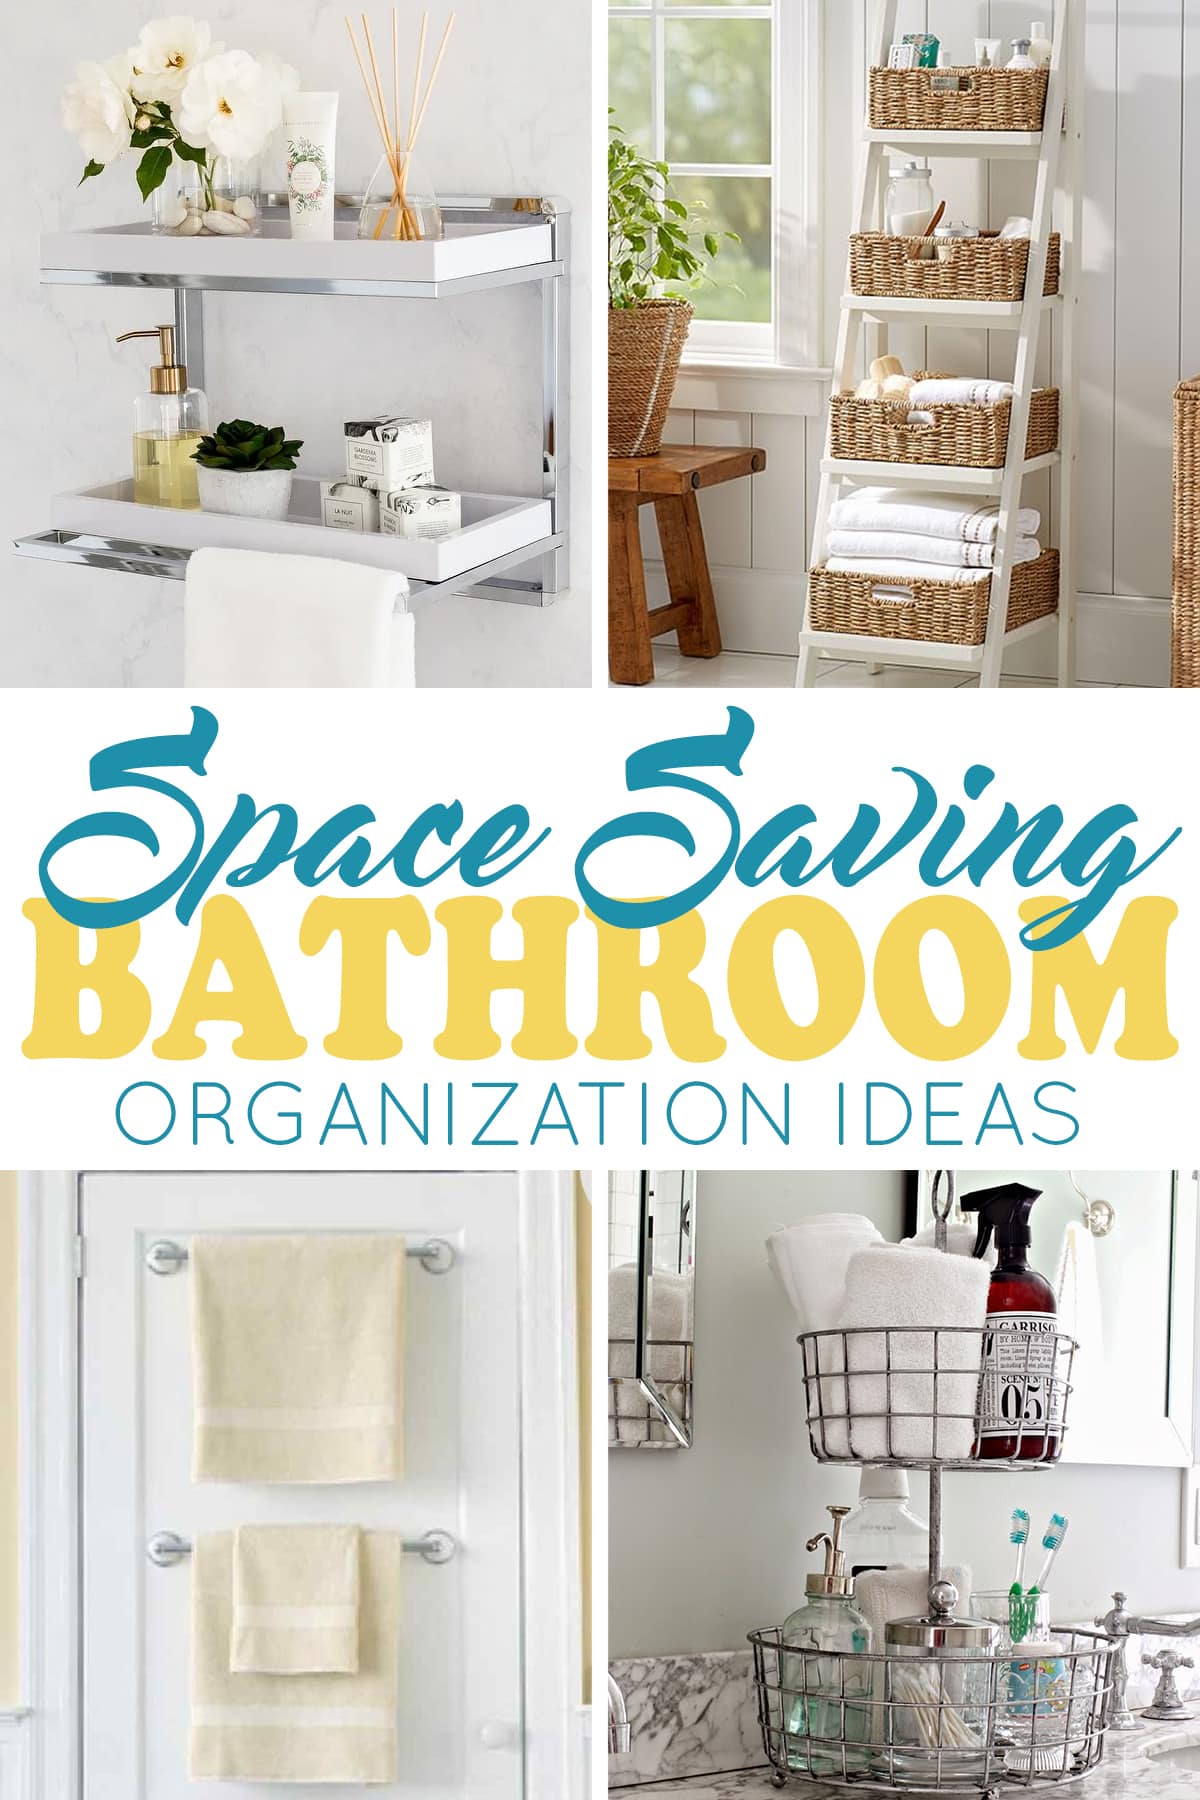 Collage of options for Bathroom storage ideas like ladder storage, shelves, trays, and racks with article title overlay.